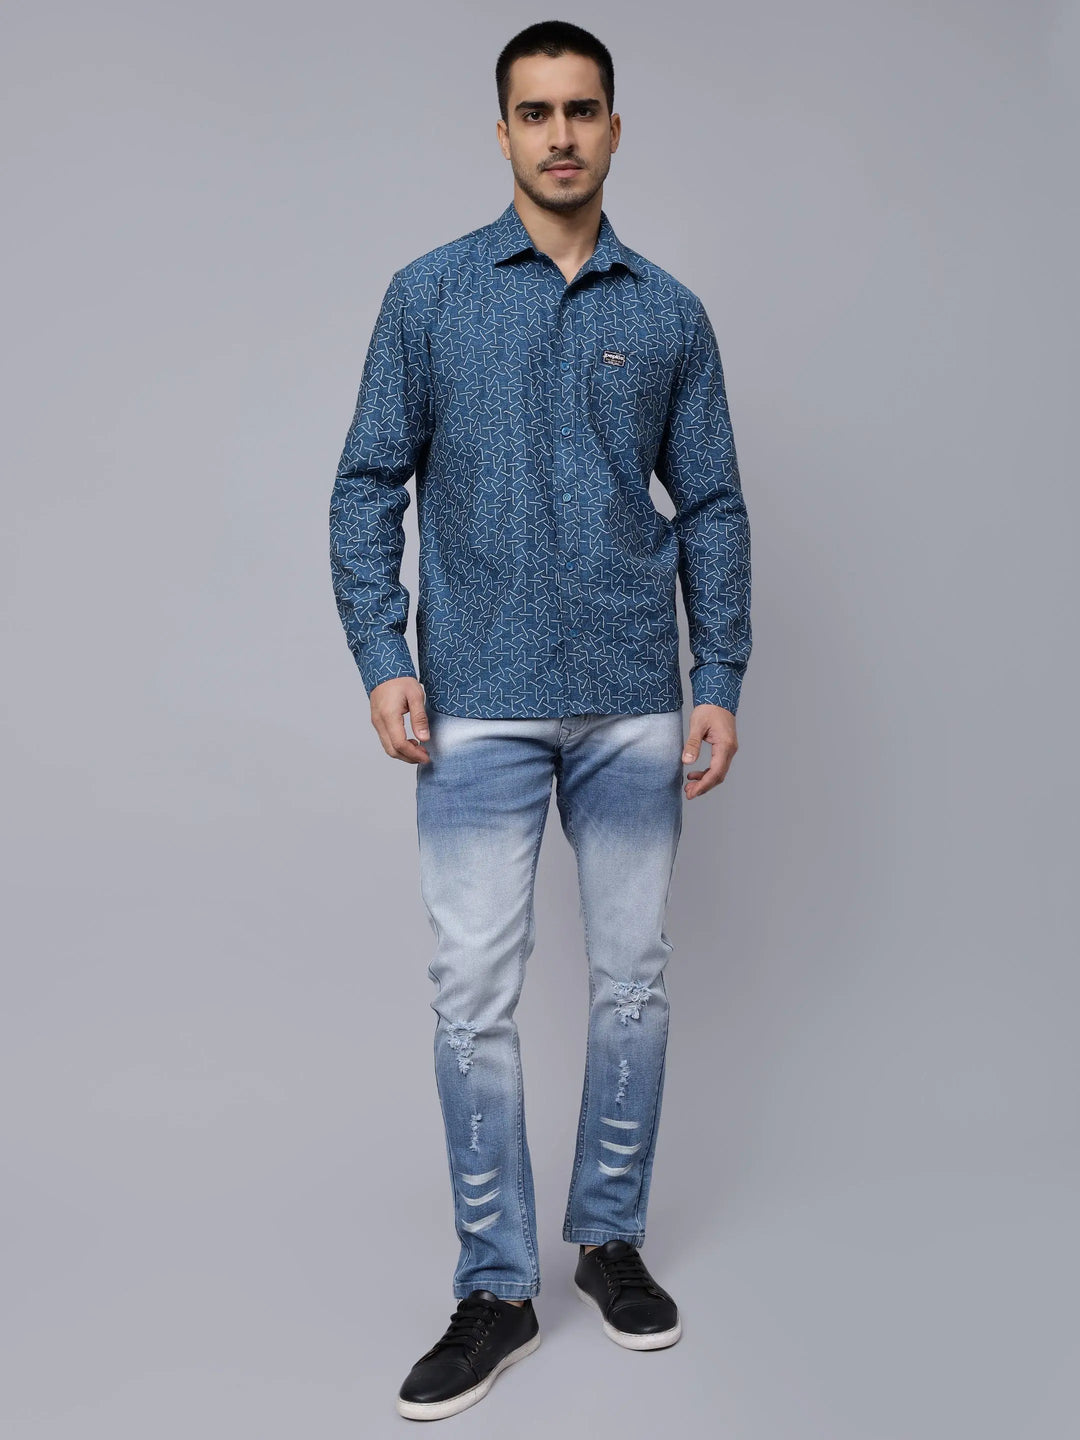 Regular Fit Pure Cotton Blue Printed Casual Shirt For Men - Peplos Jeans 